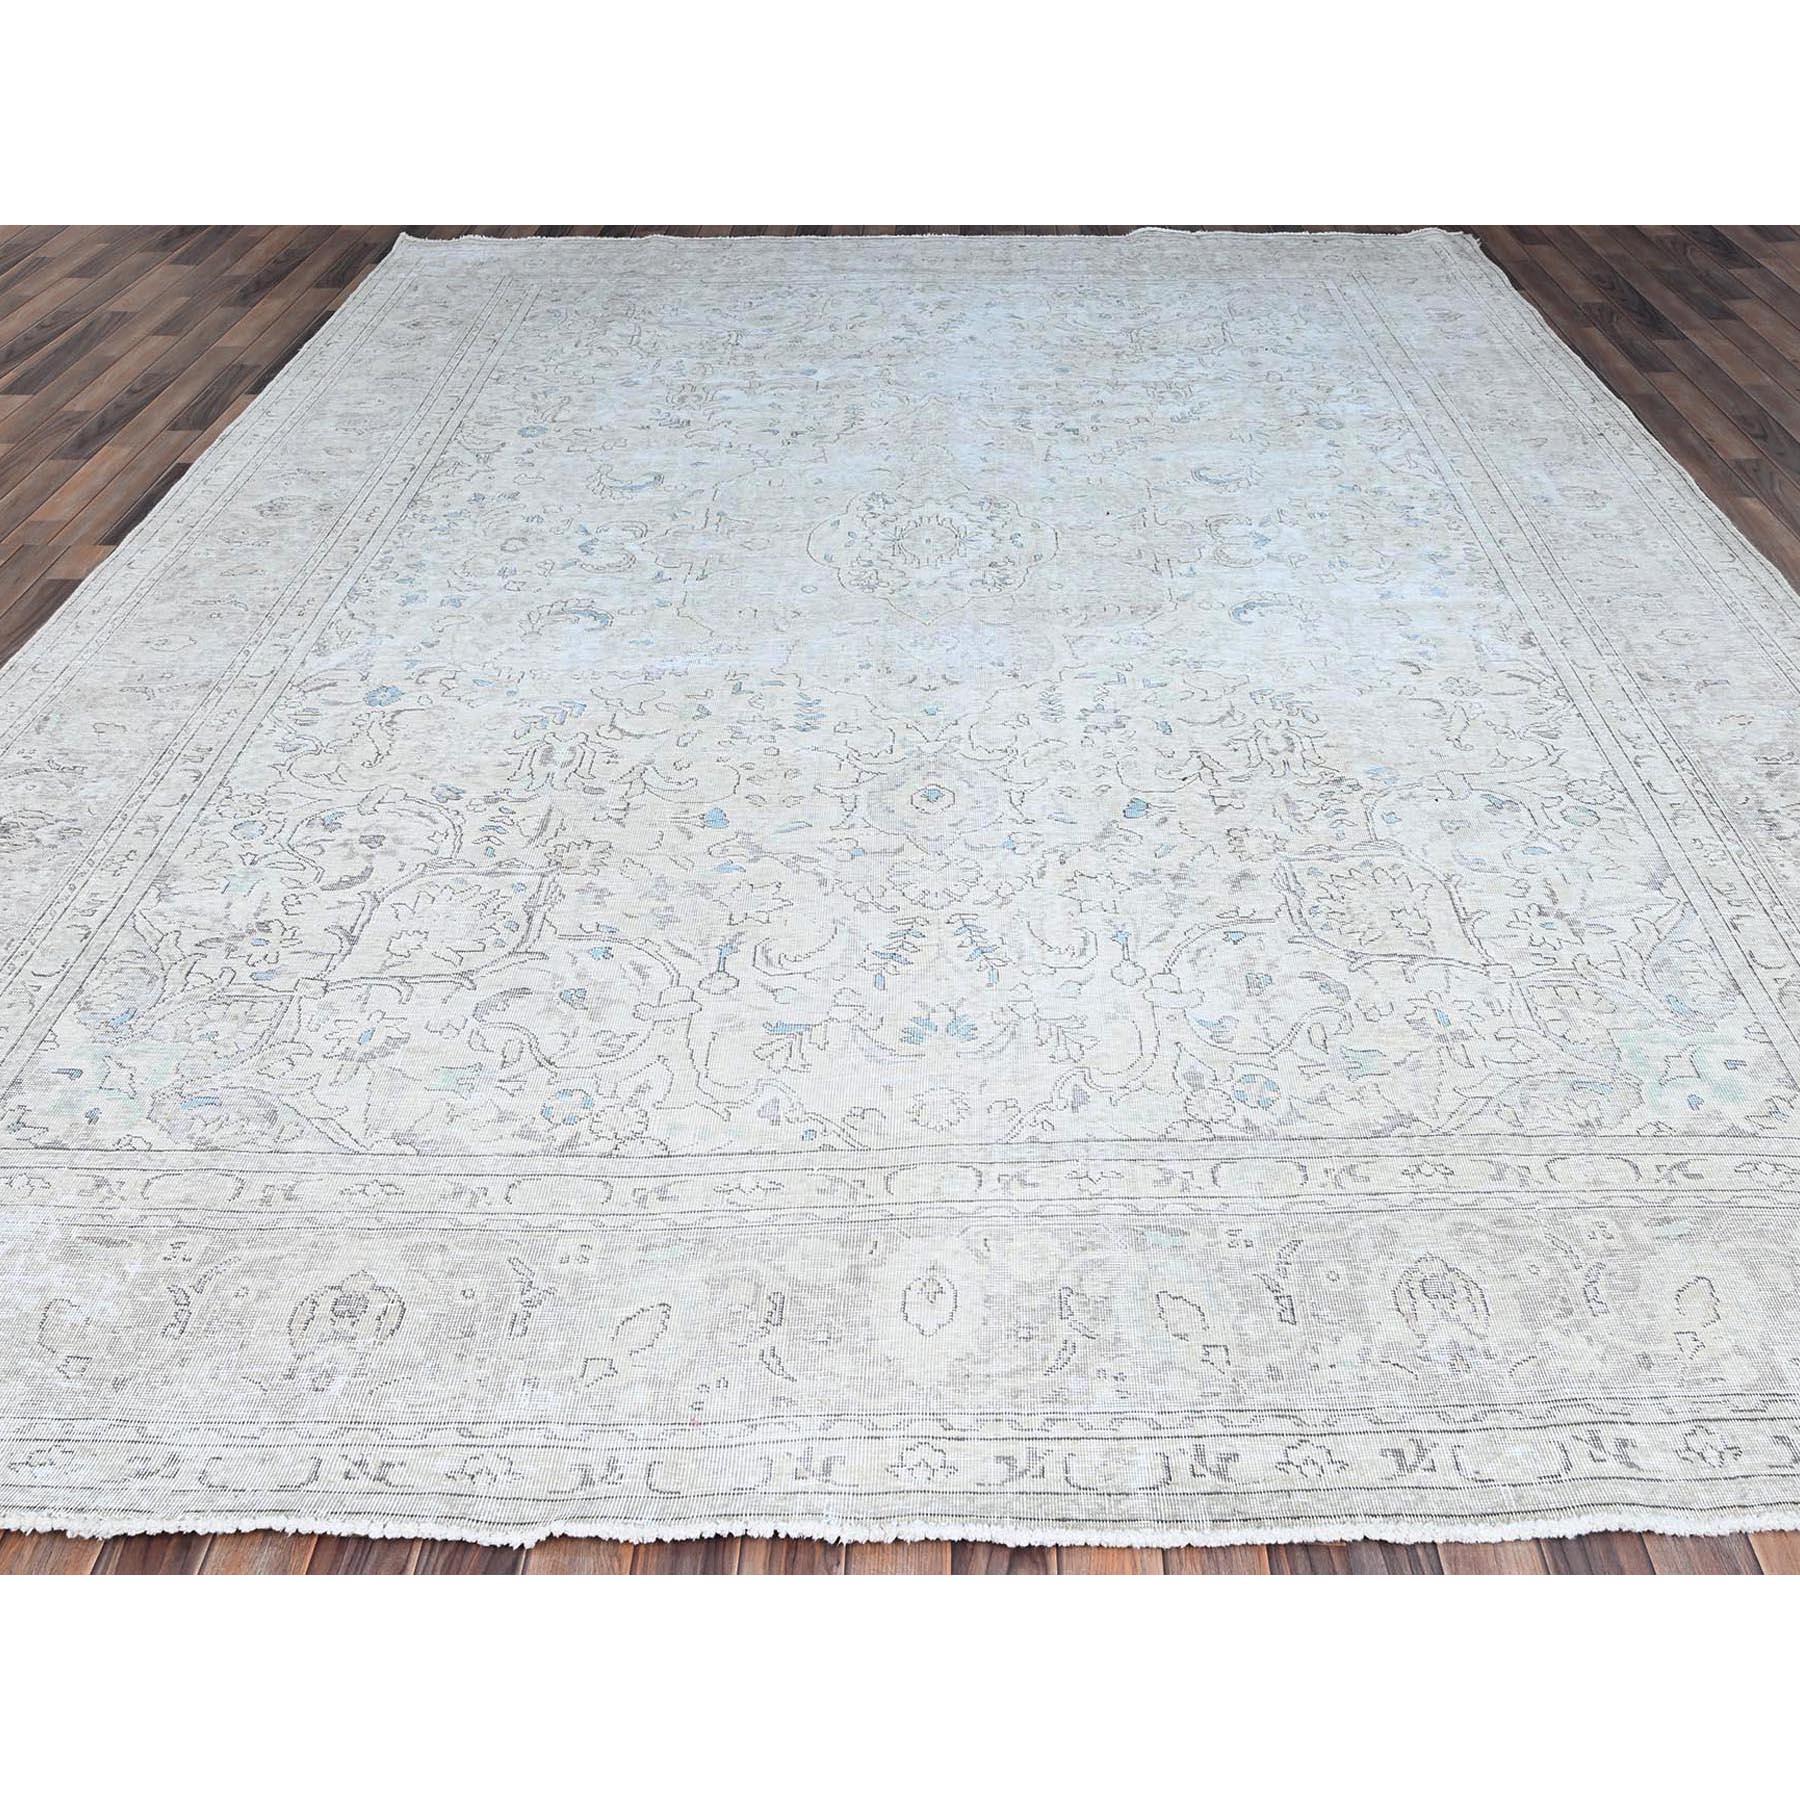 Medieval Ivory Hand Knotted Old Persian White Wash Tabriz Pure Wool Worn Down Clean Rug